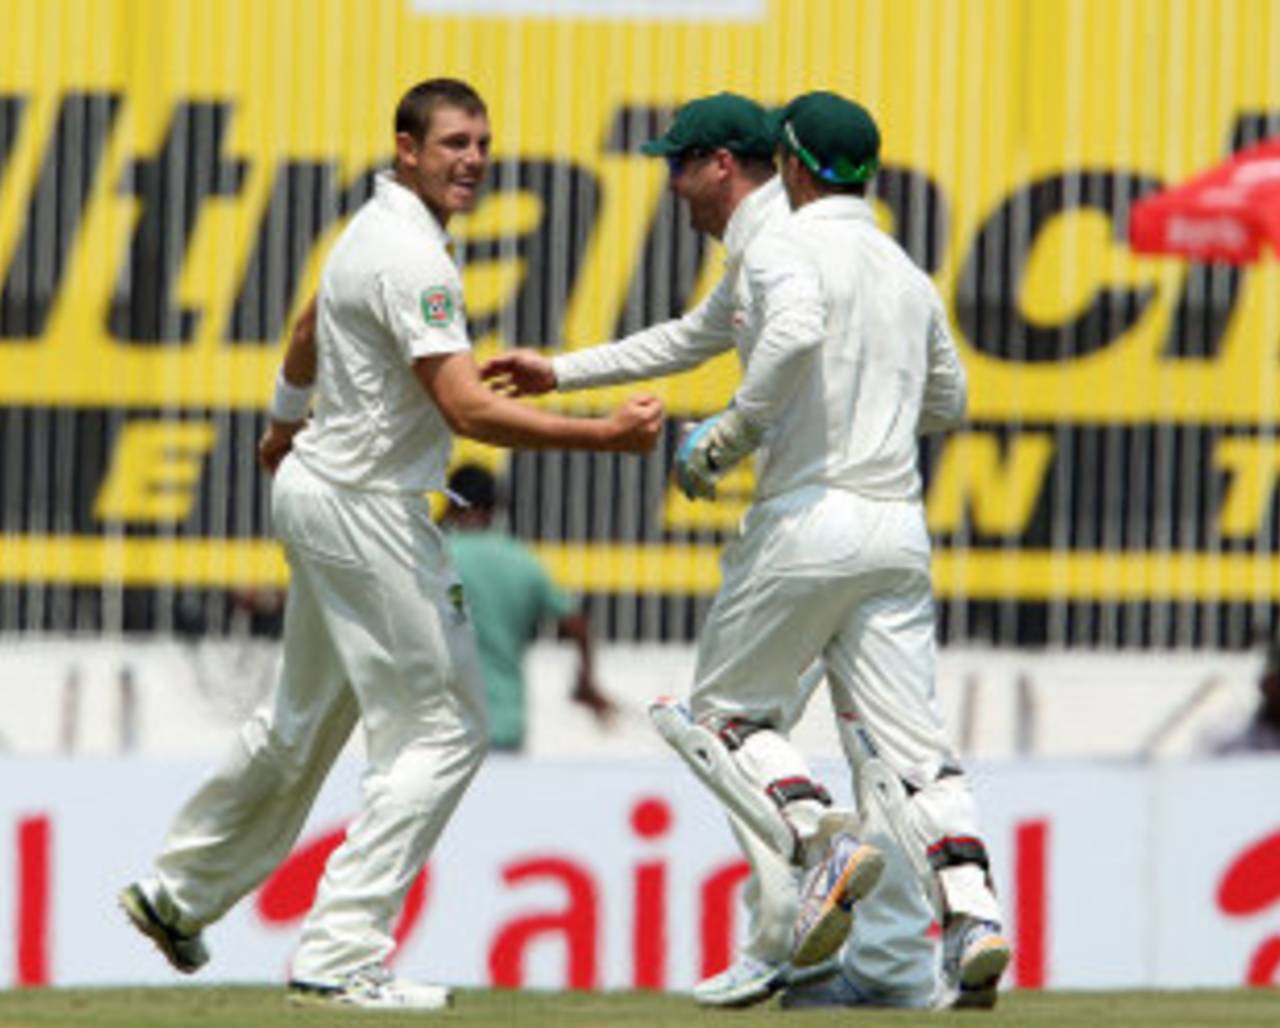 James Pattinson stung India thrice in his six overs after India's spinners took all 10 Australian wickets&nbsp;&nbsp;&bull;&nbsp;&nbsp;BCCI